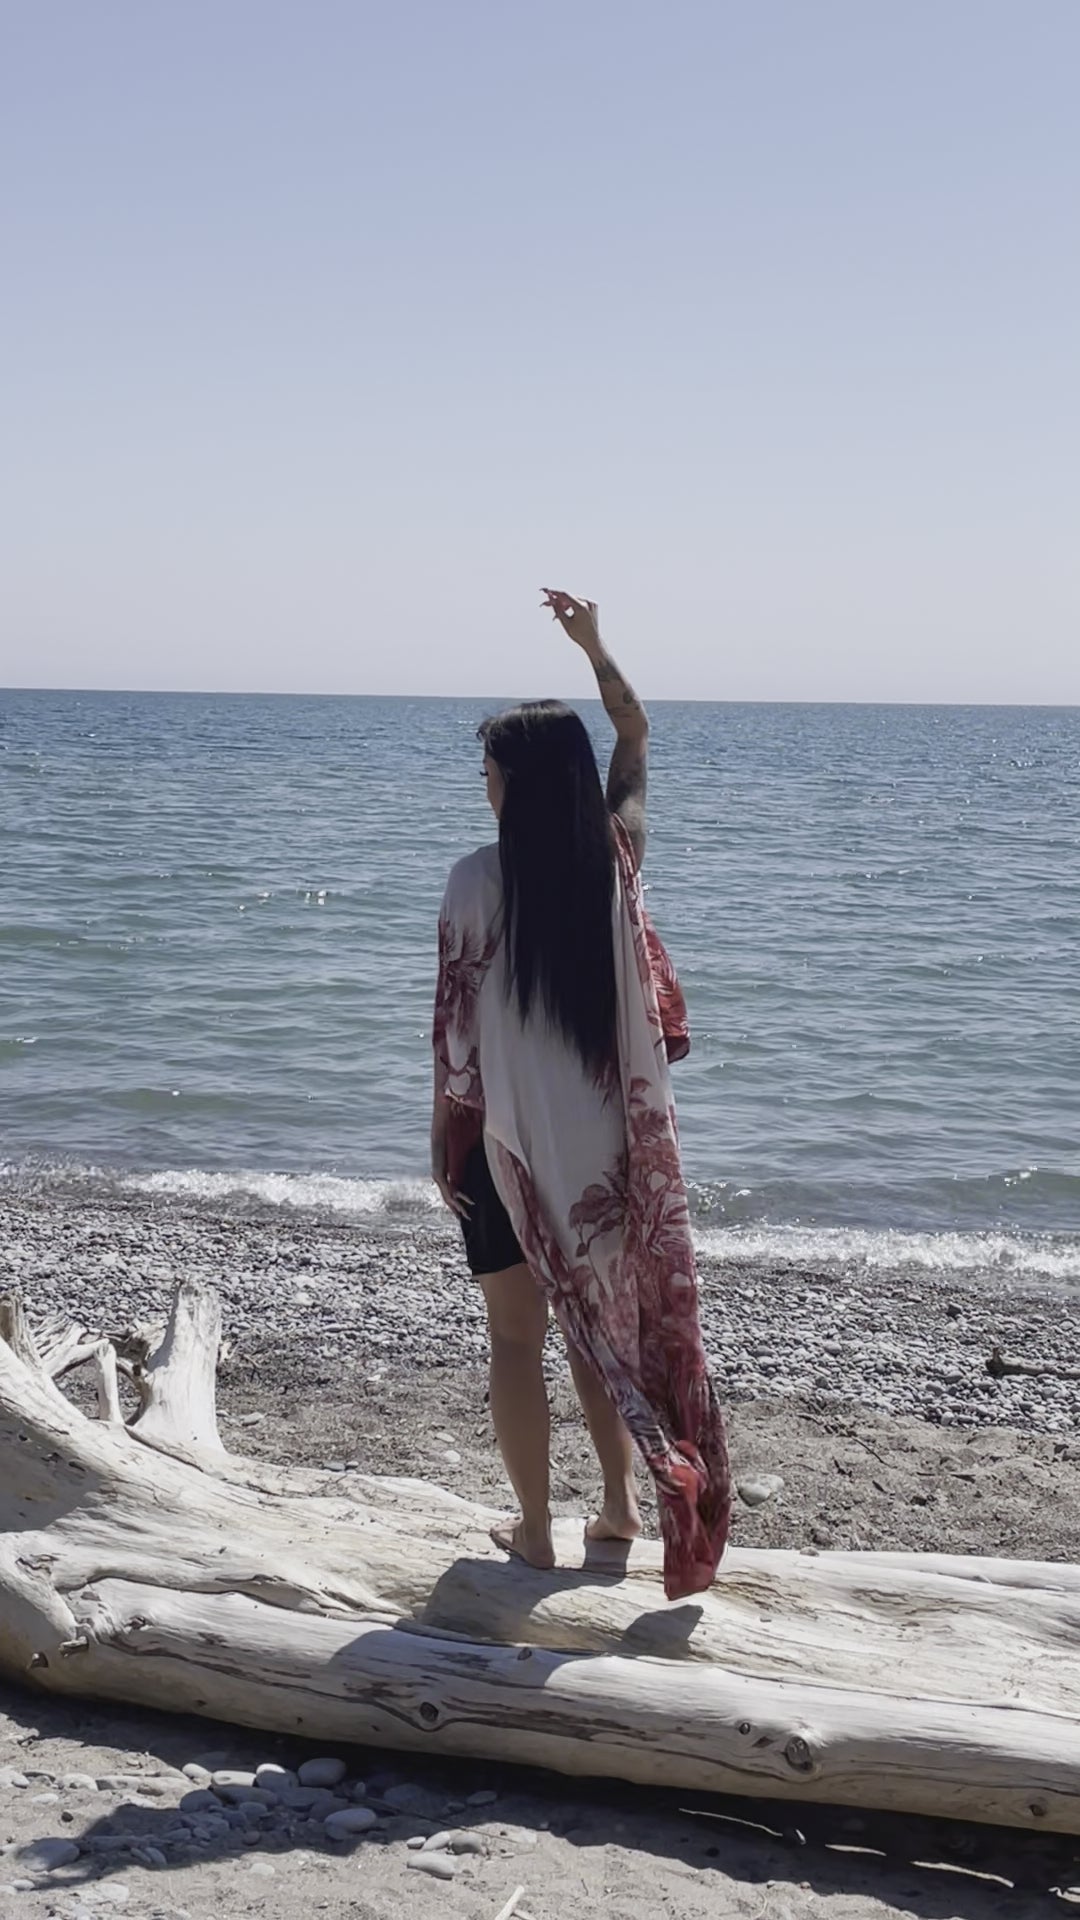 video of woman wearing long white beach floral cover up and standing on log